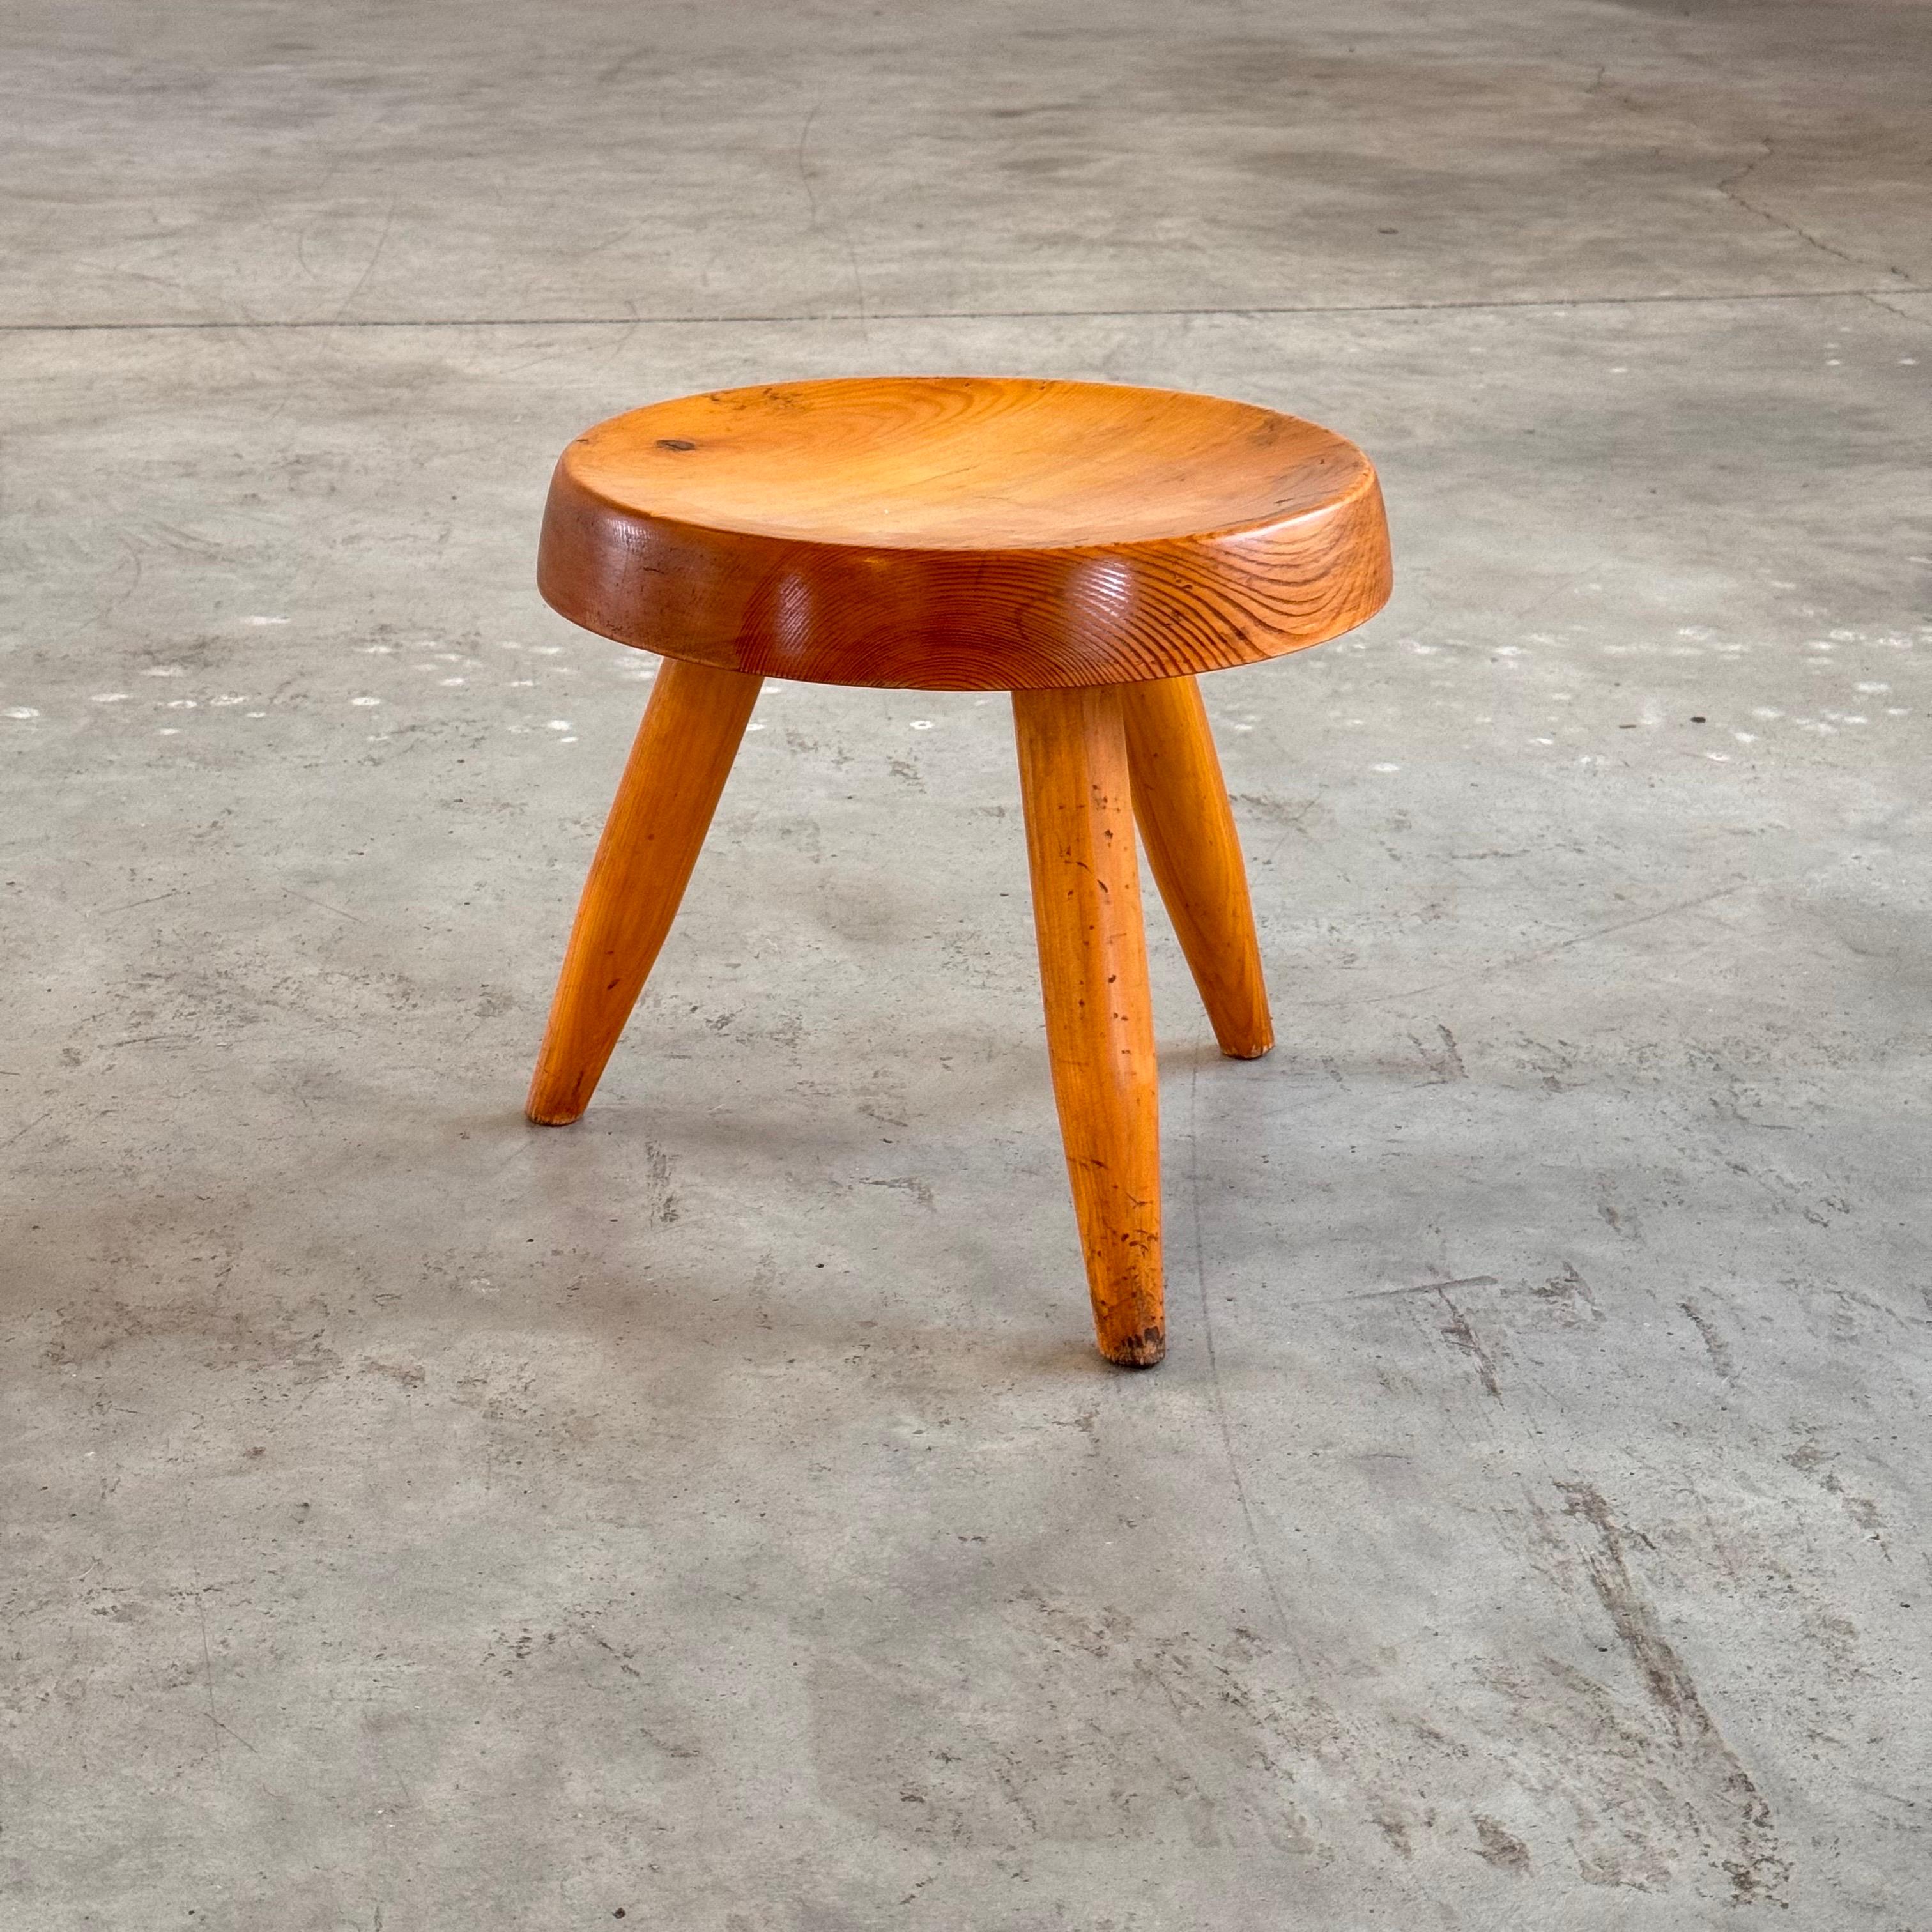 Crafted as a homage to pastoral mountain life, this original low stool, affectionately known as the Berger Stool, encapsulates Perriand's mastery of form and material.

Inspired by the rugged beauty of the Alps, this stool seamlessly integrates